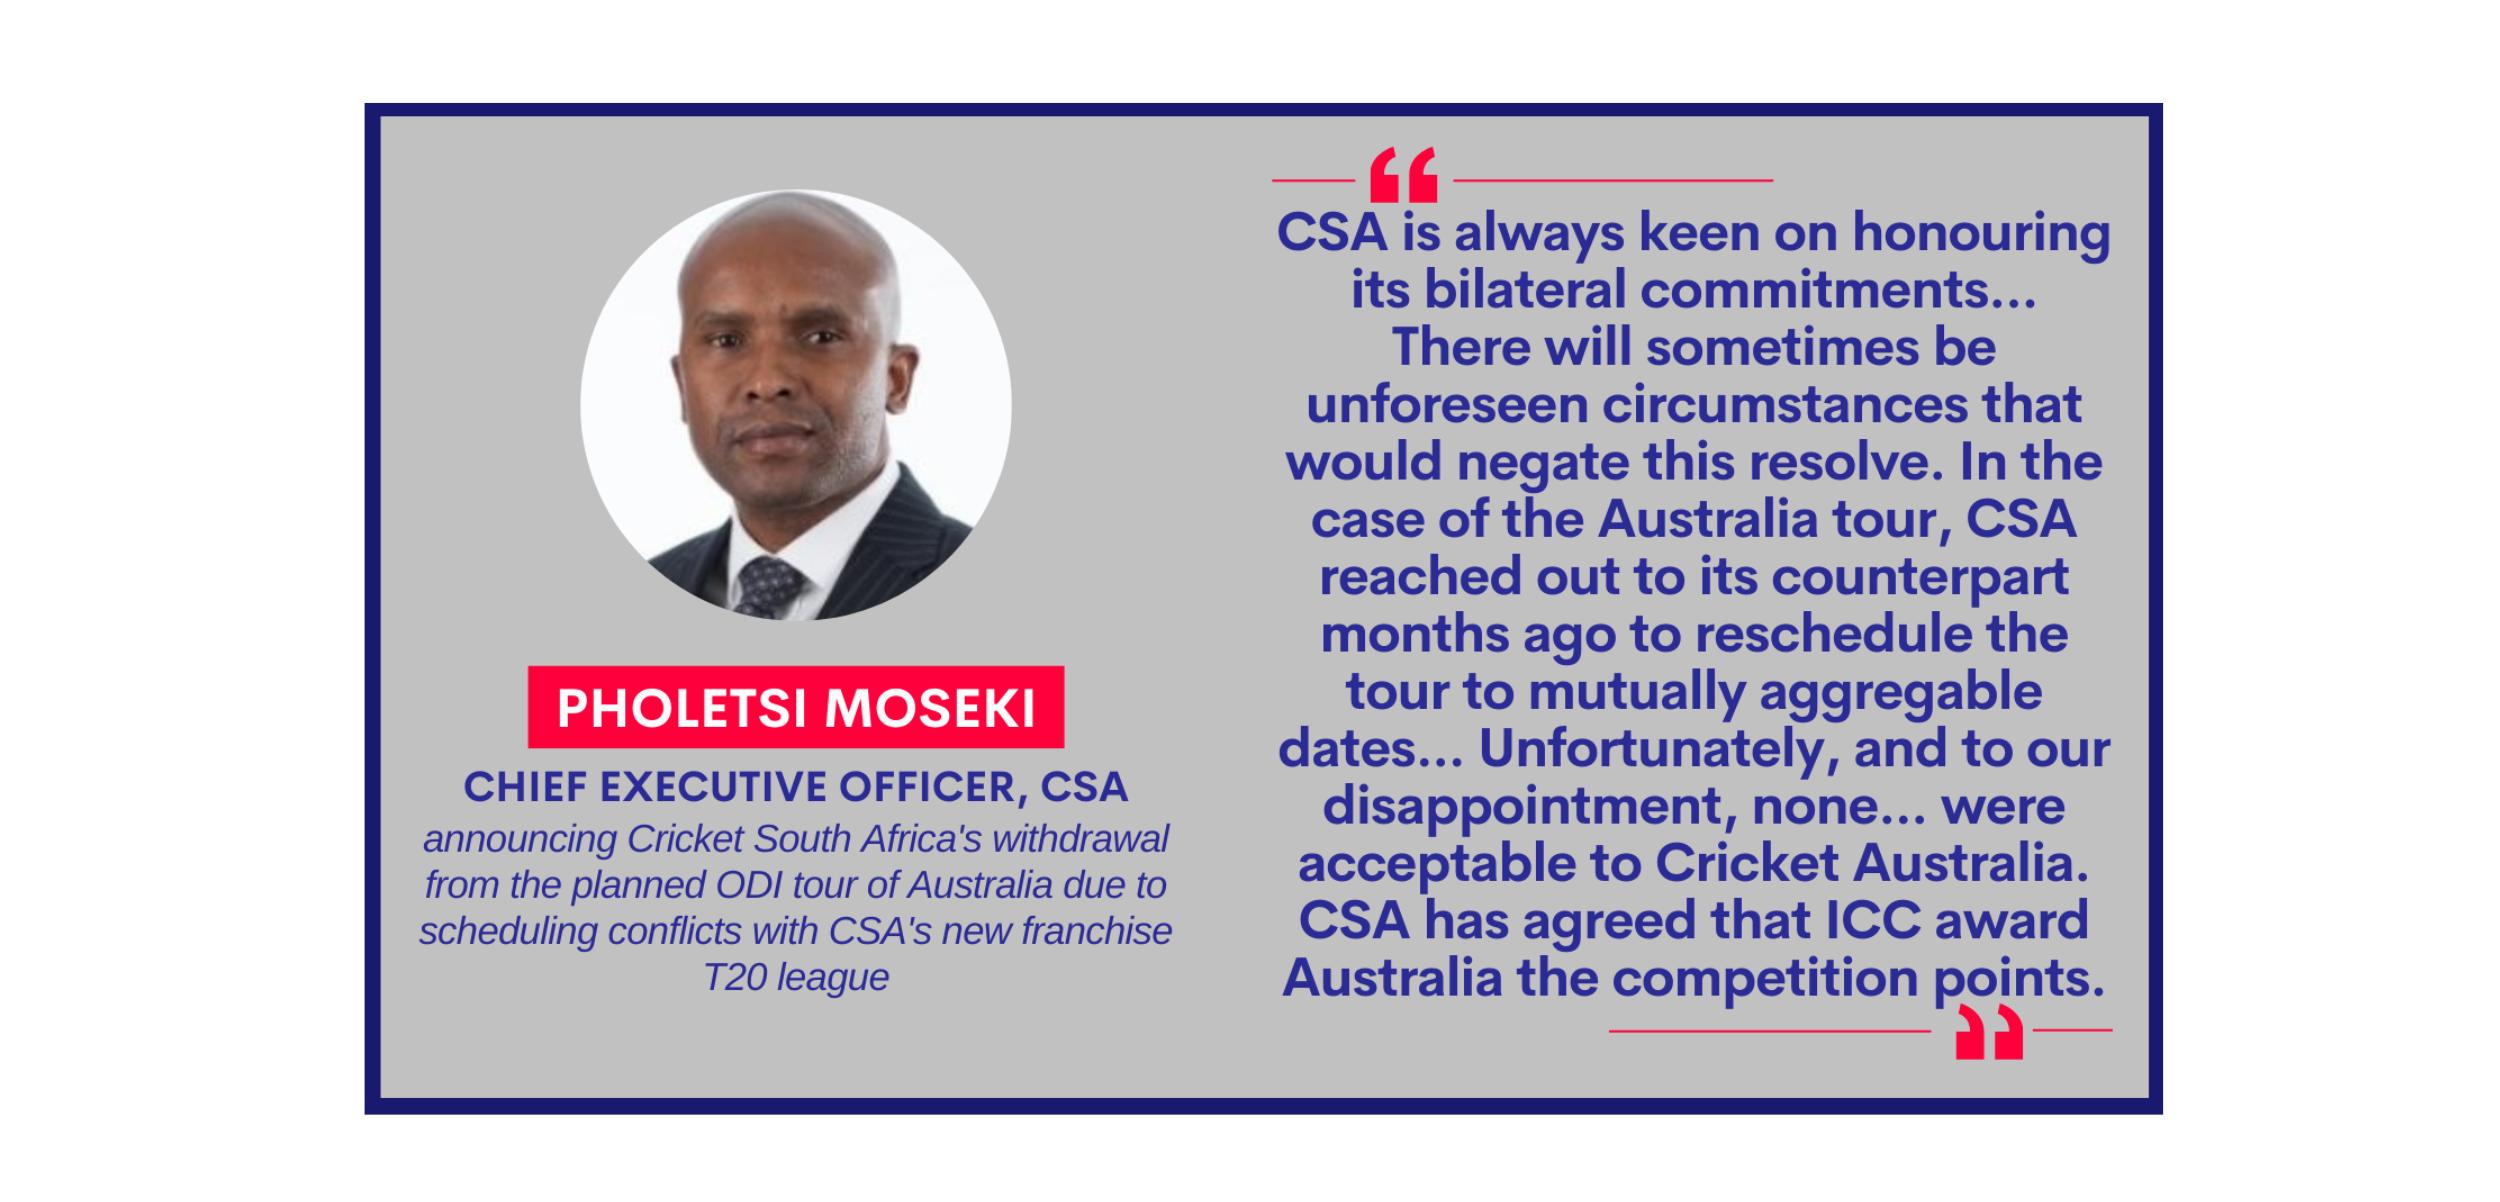 Pholetsi Moseki, Chief Executive Officer, CSA announcing Cricket South Africa's withdrawal from the planned ODI tour of Australia due to scheduling conflicts with CSA's new franchise T20 league